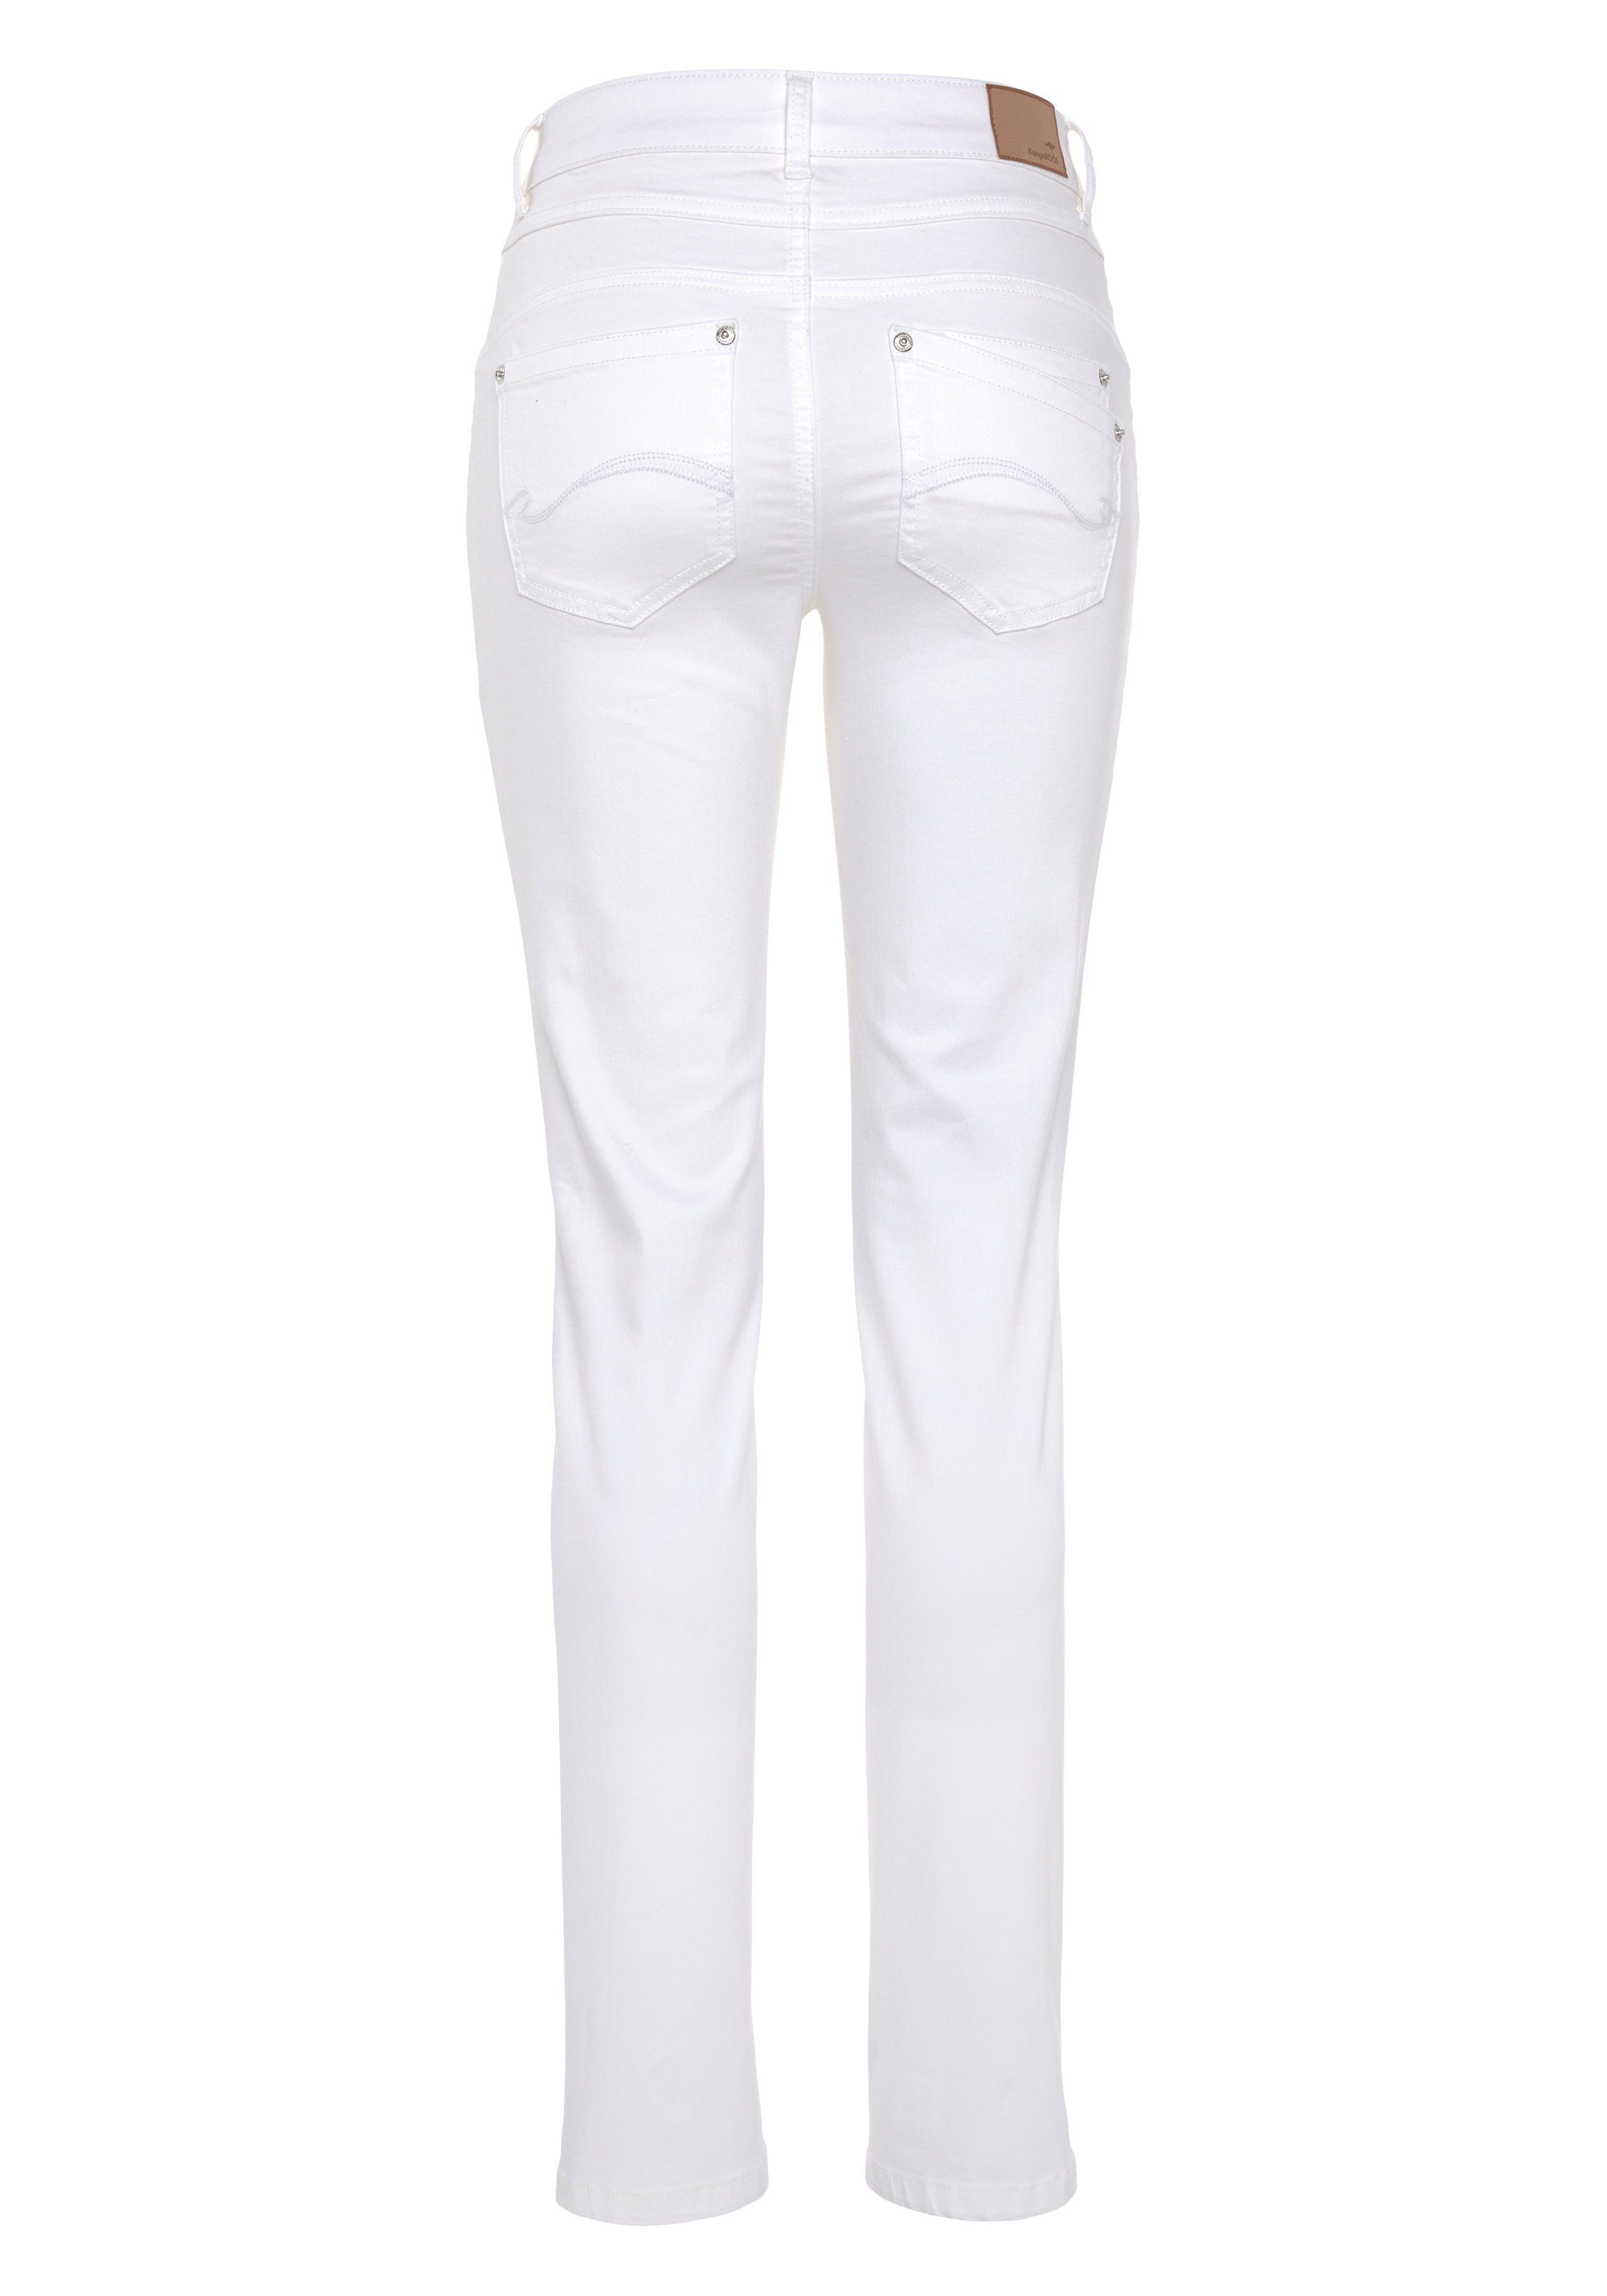 KangaROOS Relax-fit-Jeans RELAX-FIT white HIGH WAIST